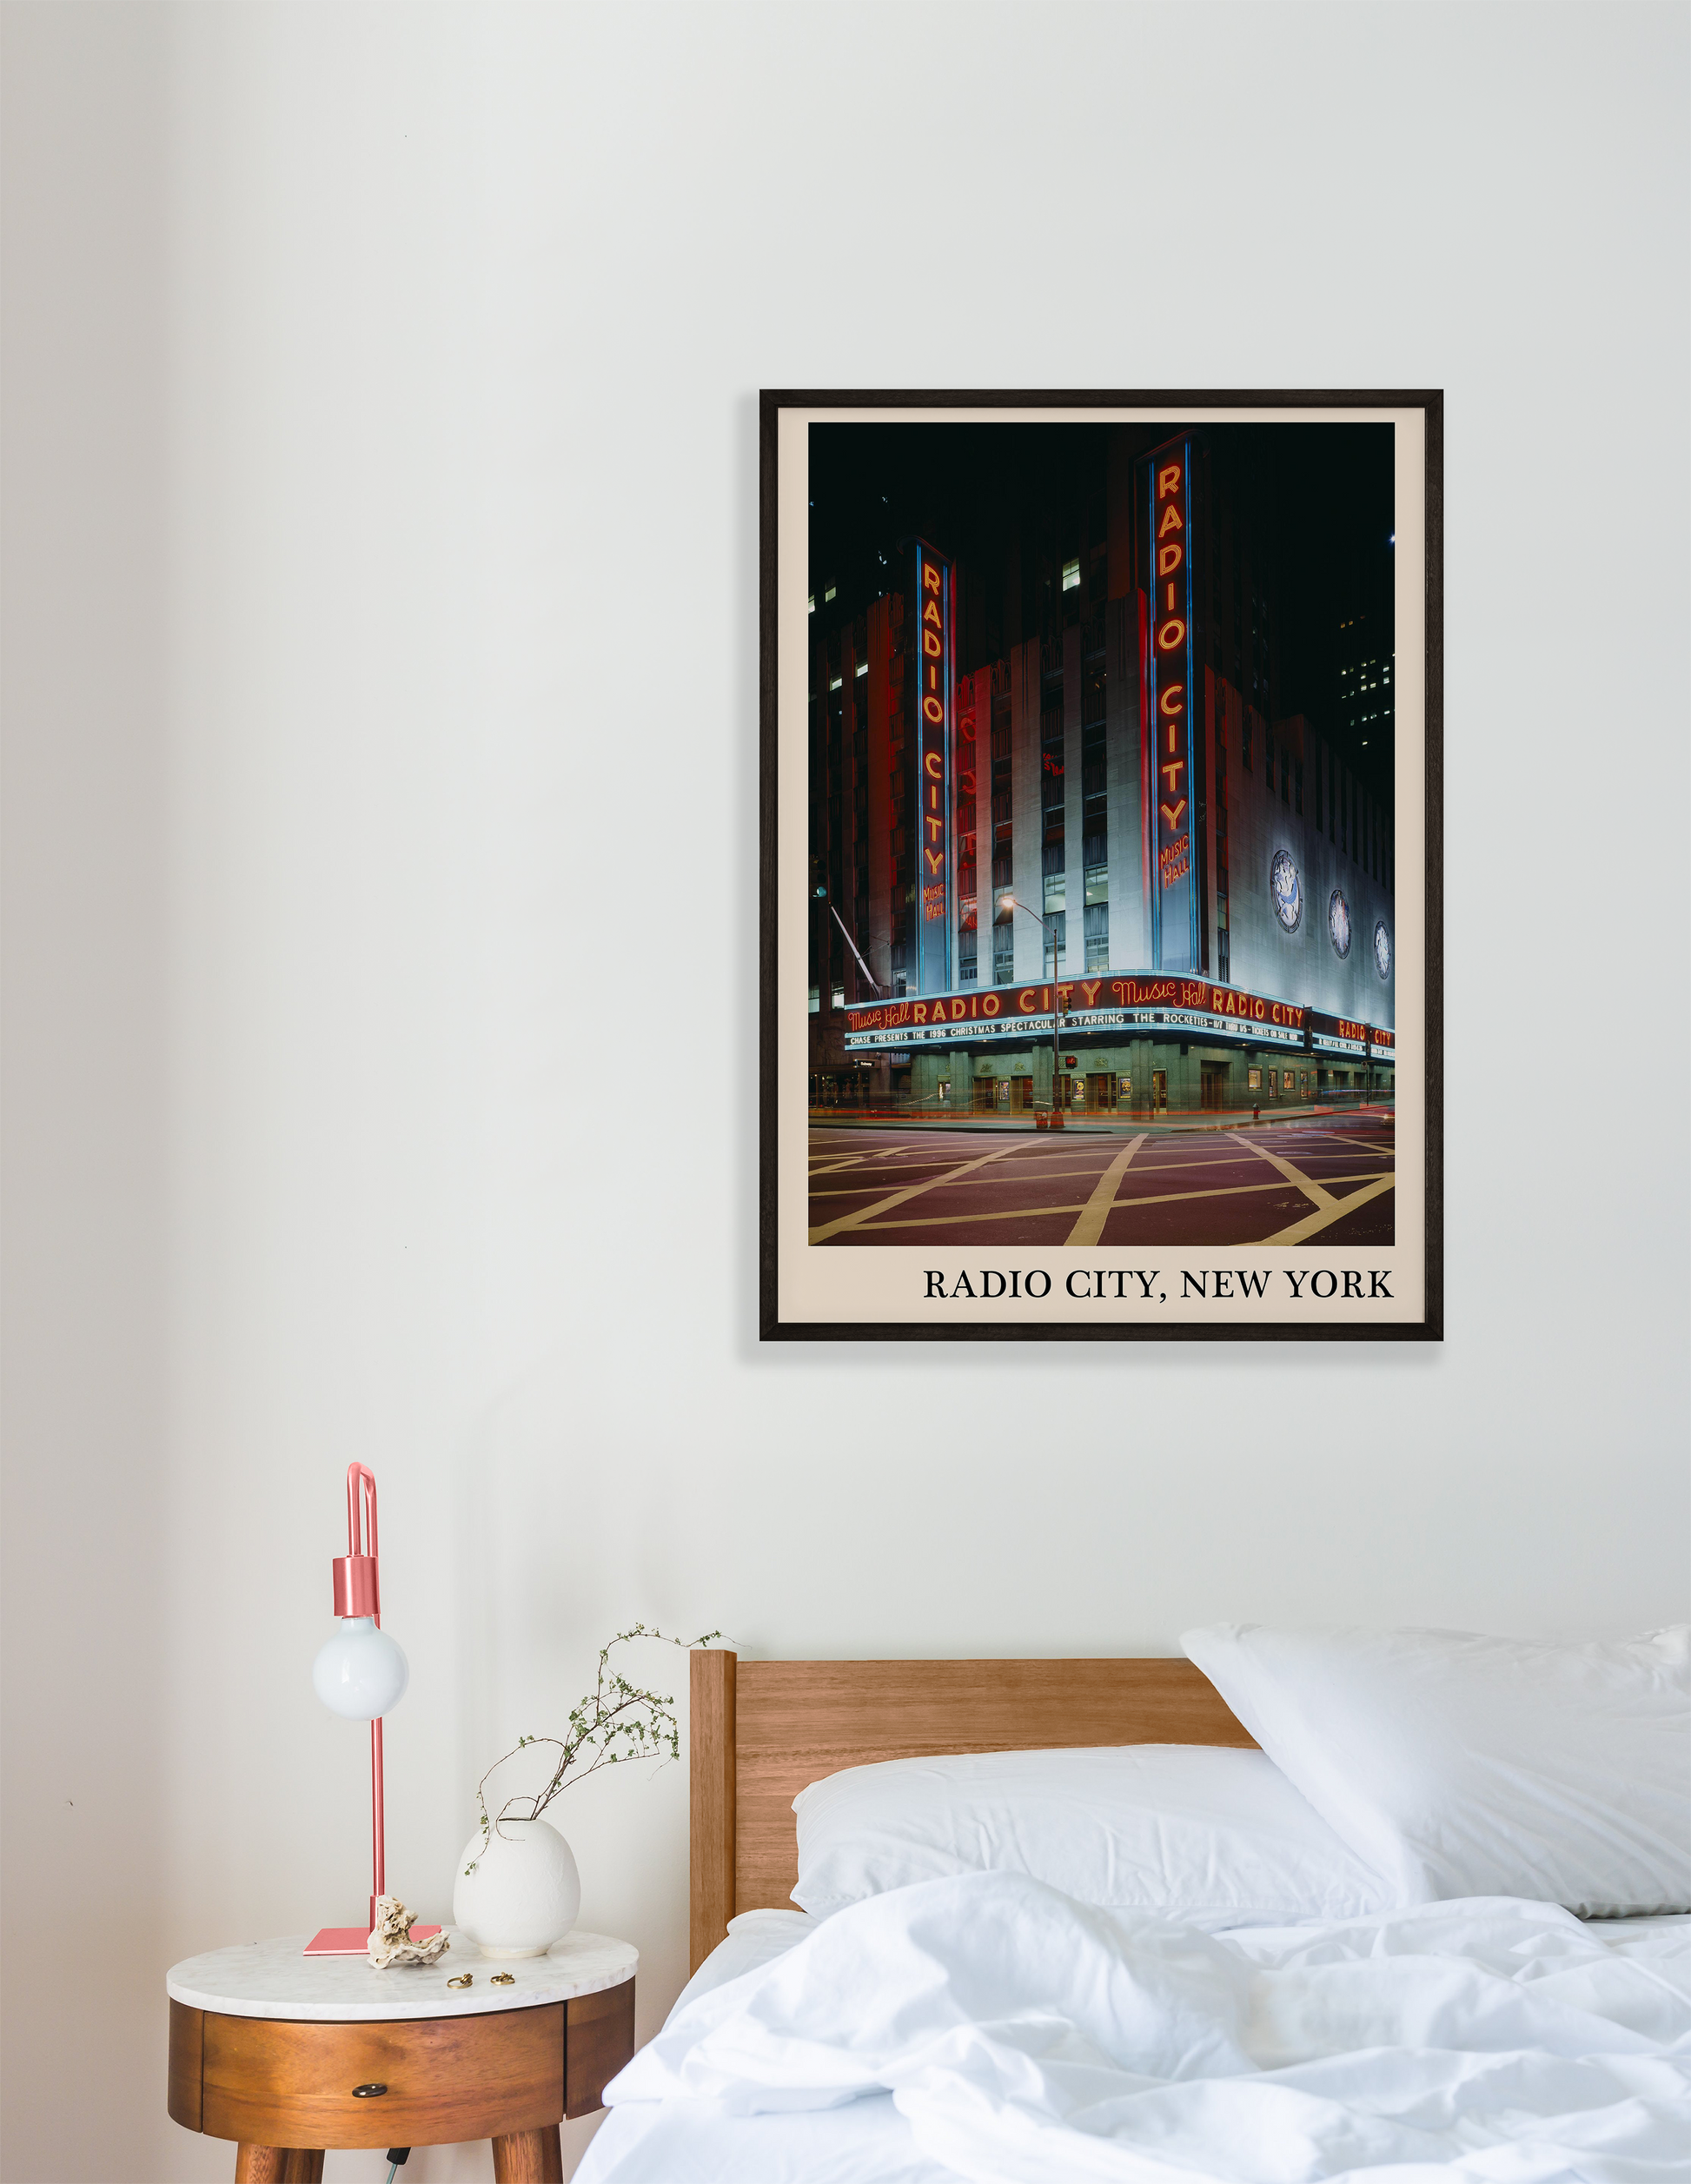 Iconic photo of Radio City in New York captured in a retro black framed jazz print, hanging on a white bedroom wall